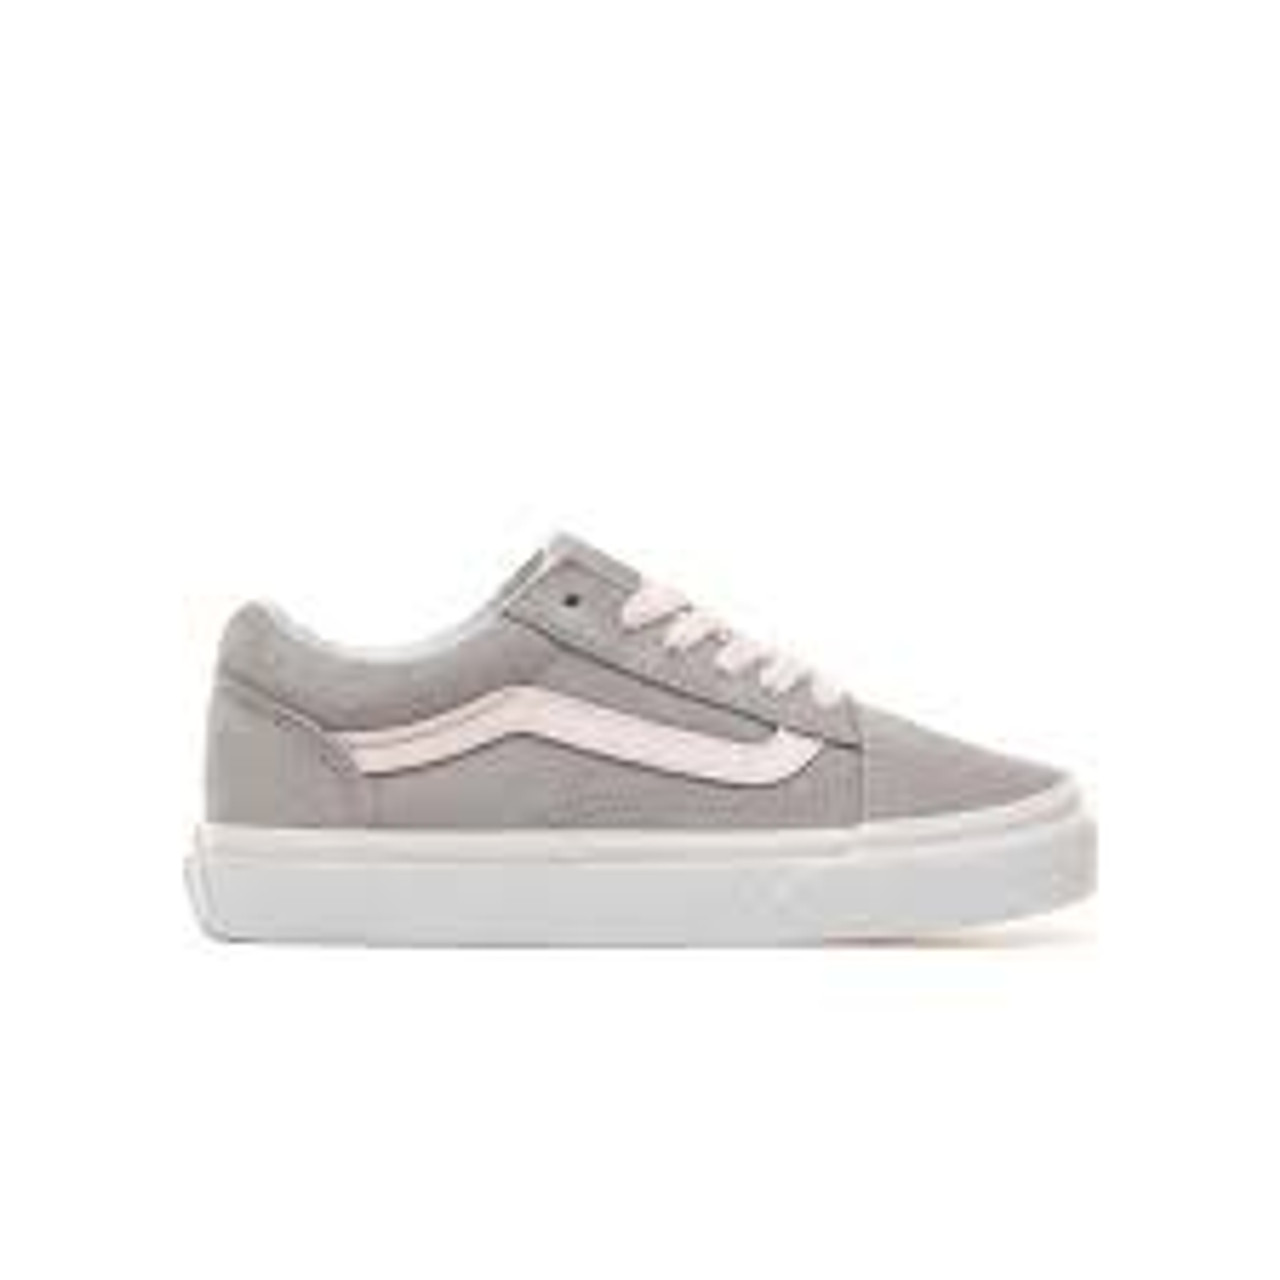 wat betreft dorst schors Vans Youth Shoes - Old Skool - Suede/Alloy/Heavenly Pink/White - Surf and  Dirt